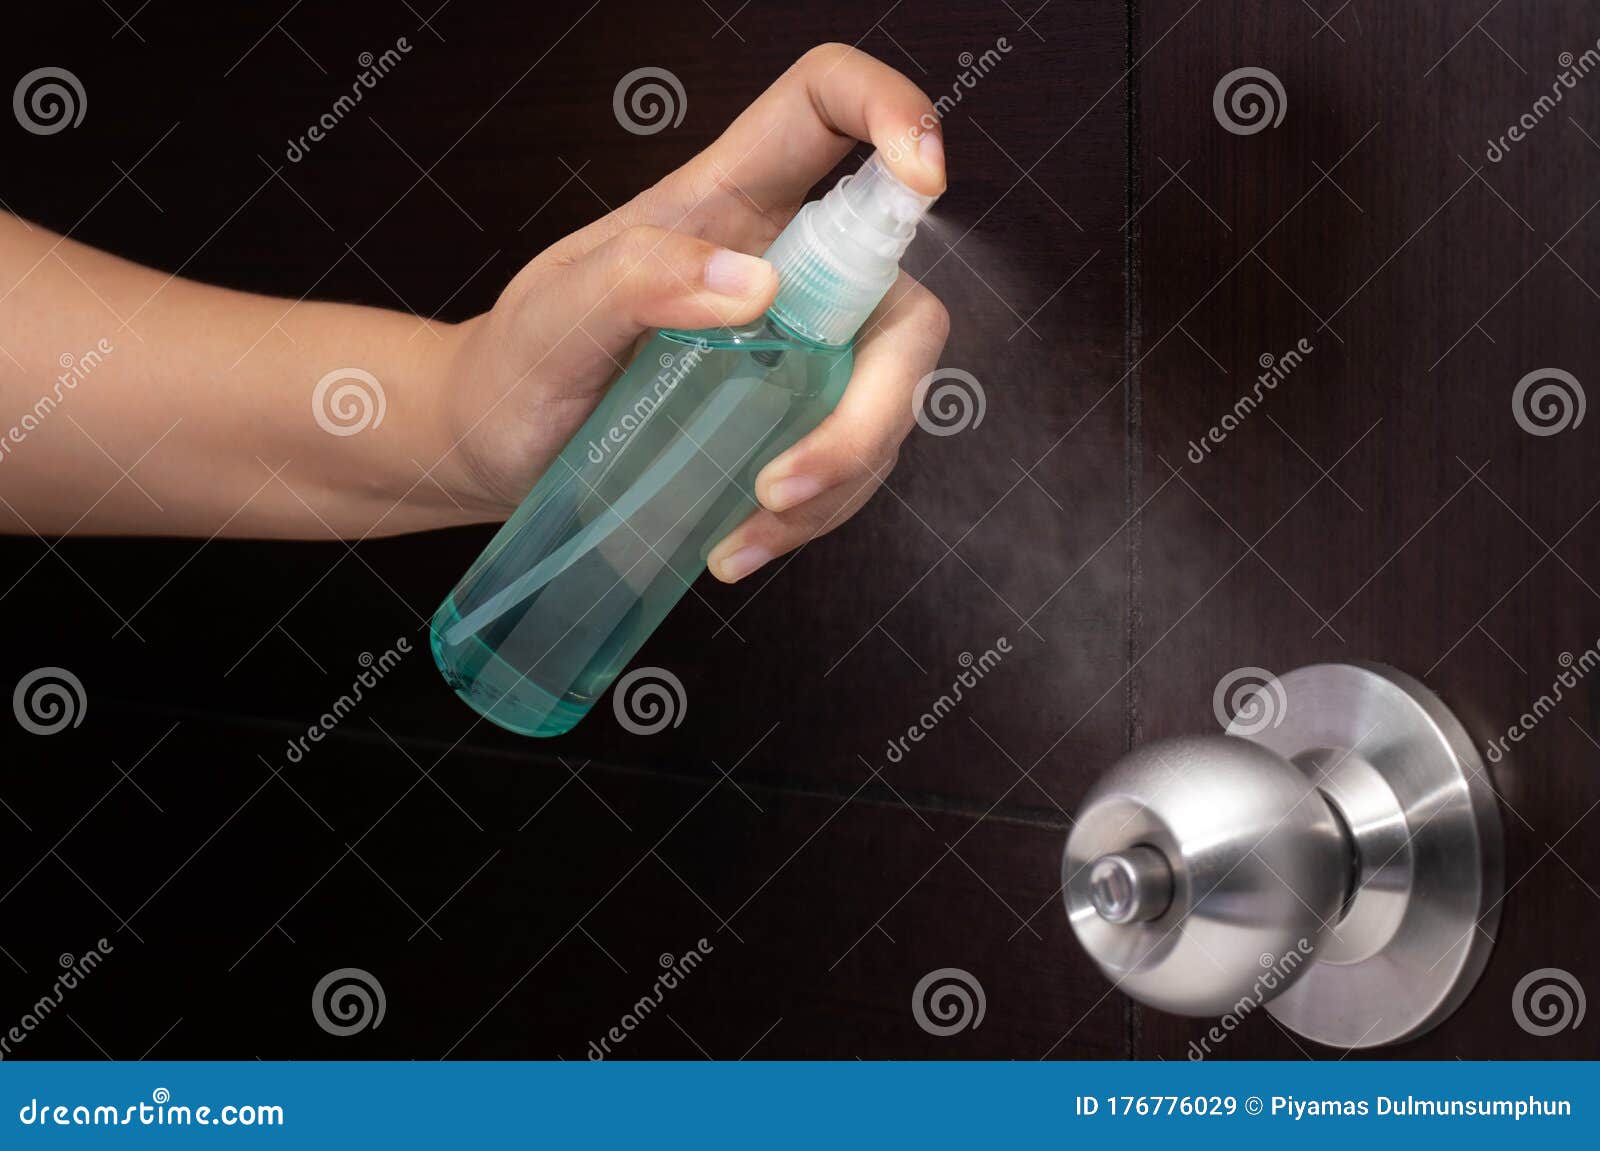 disinfect, sanitize, hygiene care. inject alcohol spray on door knob and frequently touched area for cleaning and disinfection